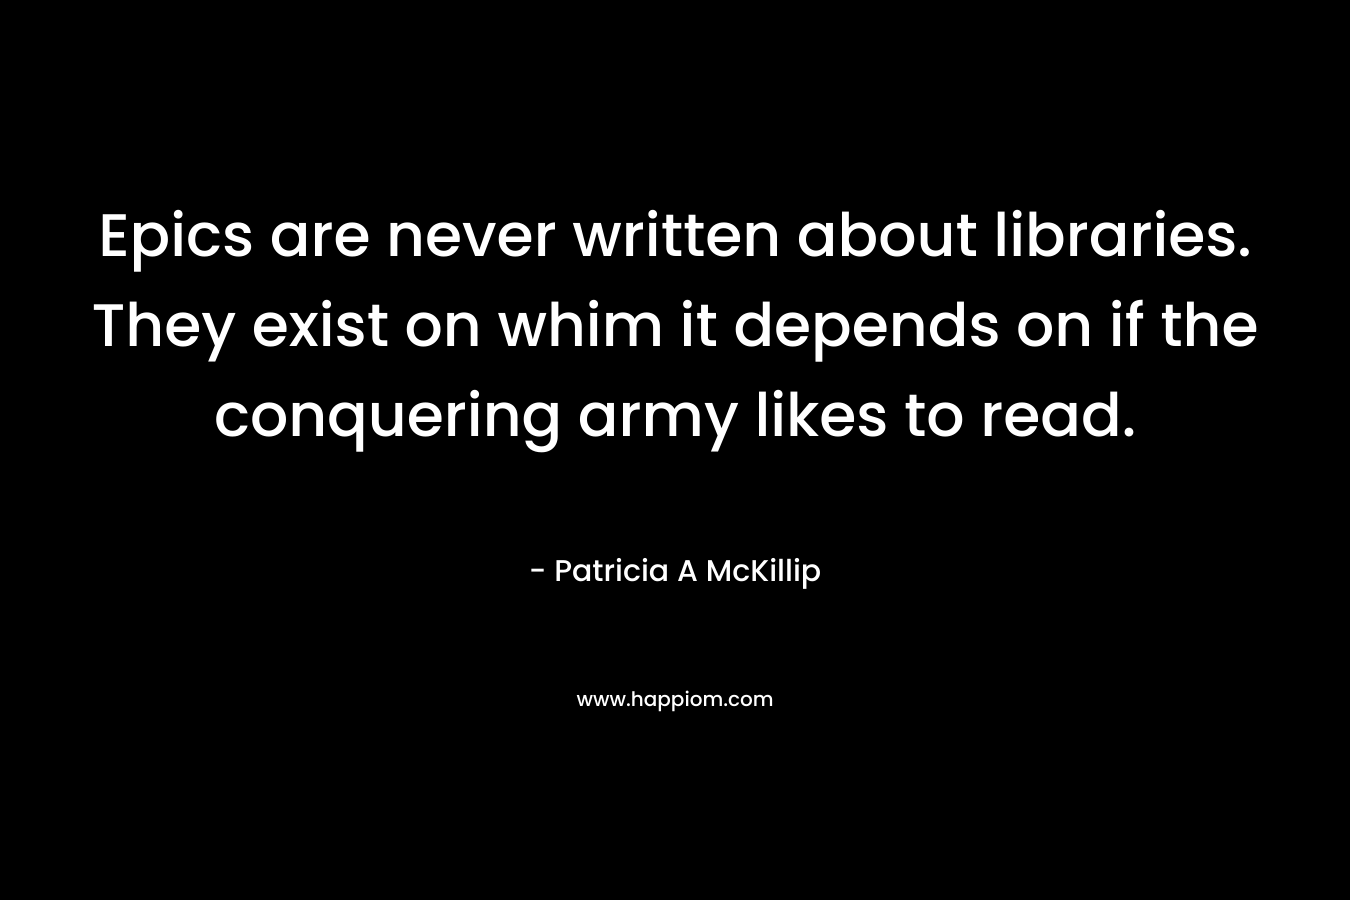 Epics are never written about libraries. They exist on whim it depends on if the conquering army likes to read.